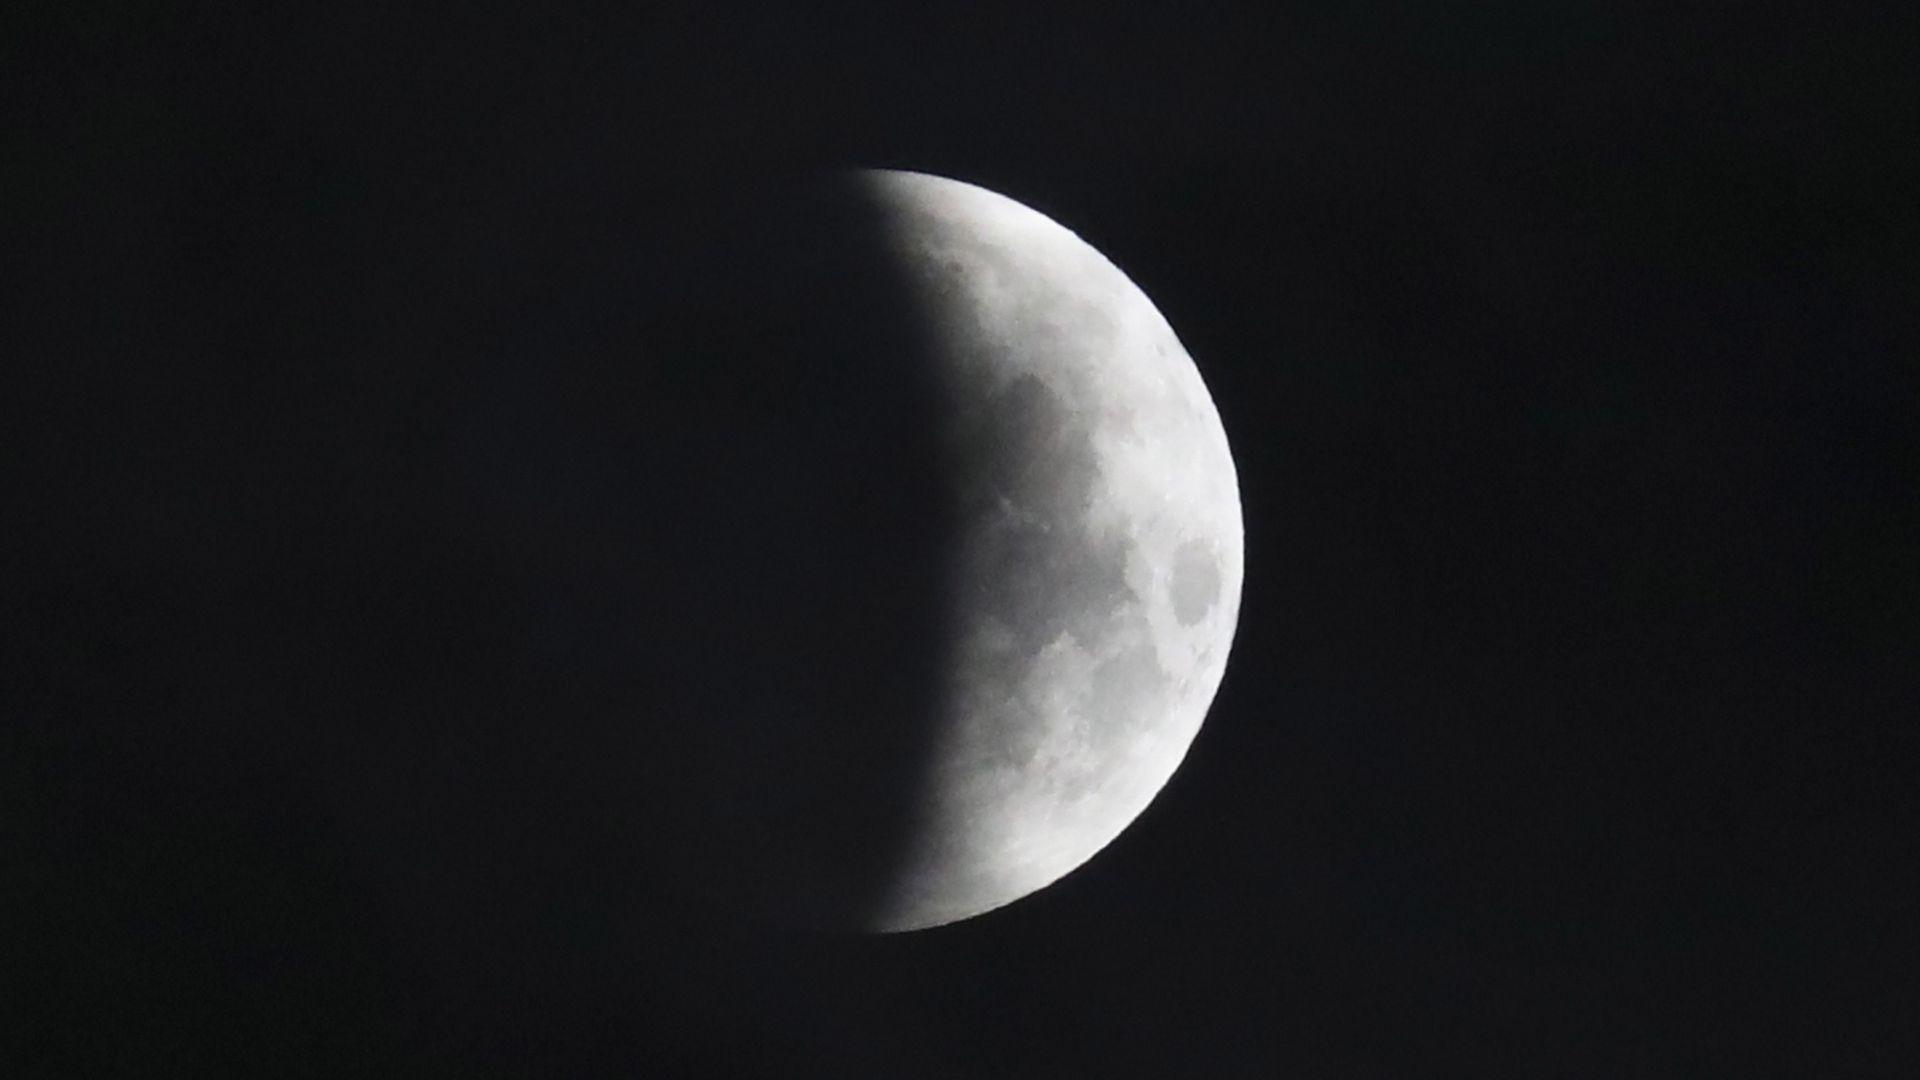 Lunar eclipse: When is the next one, and where will it be visible